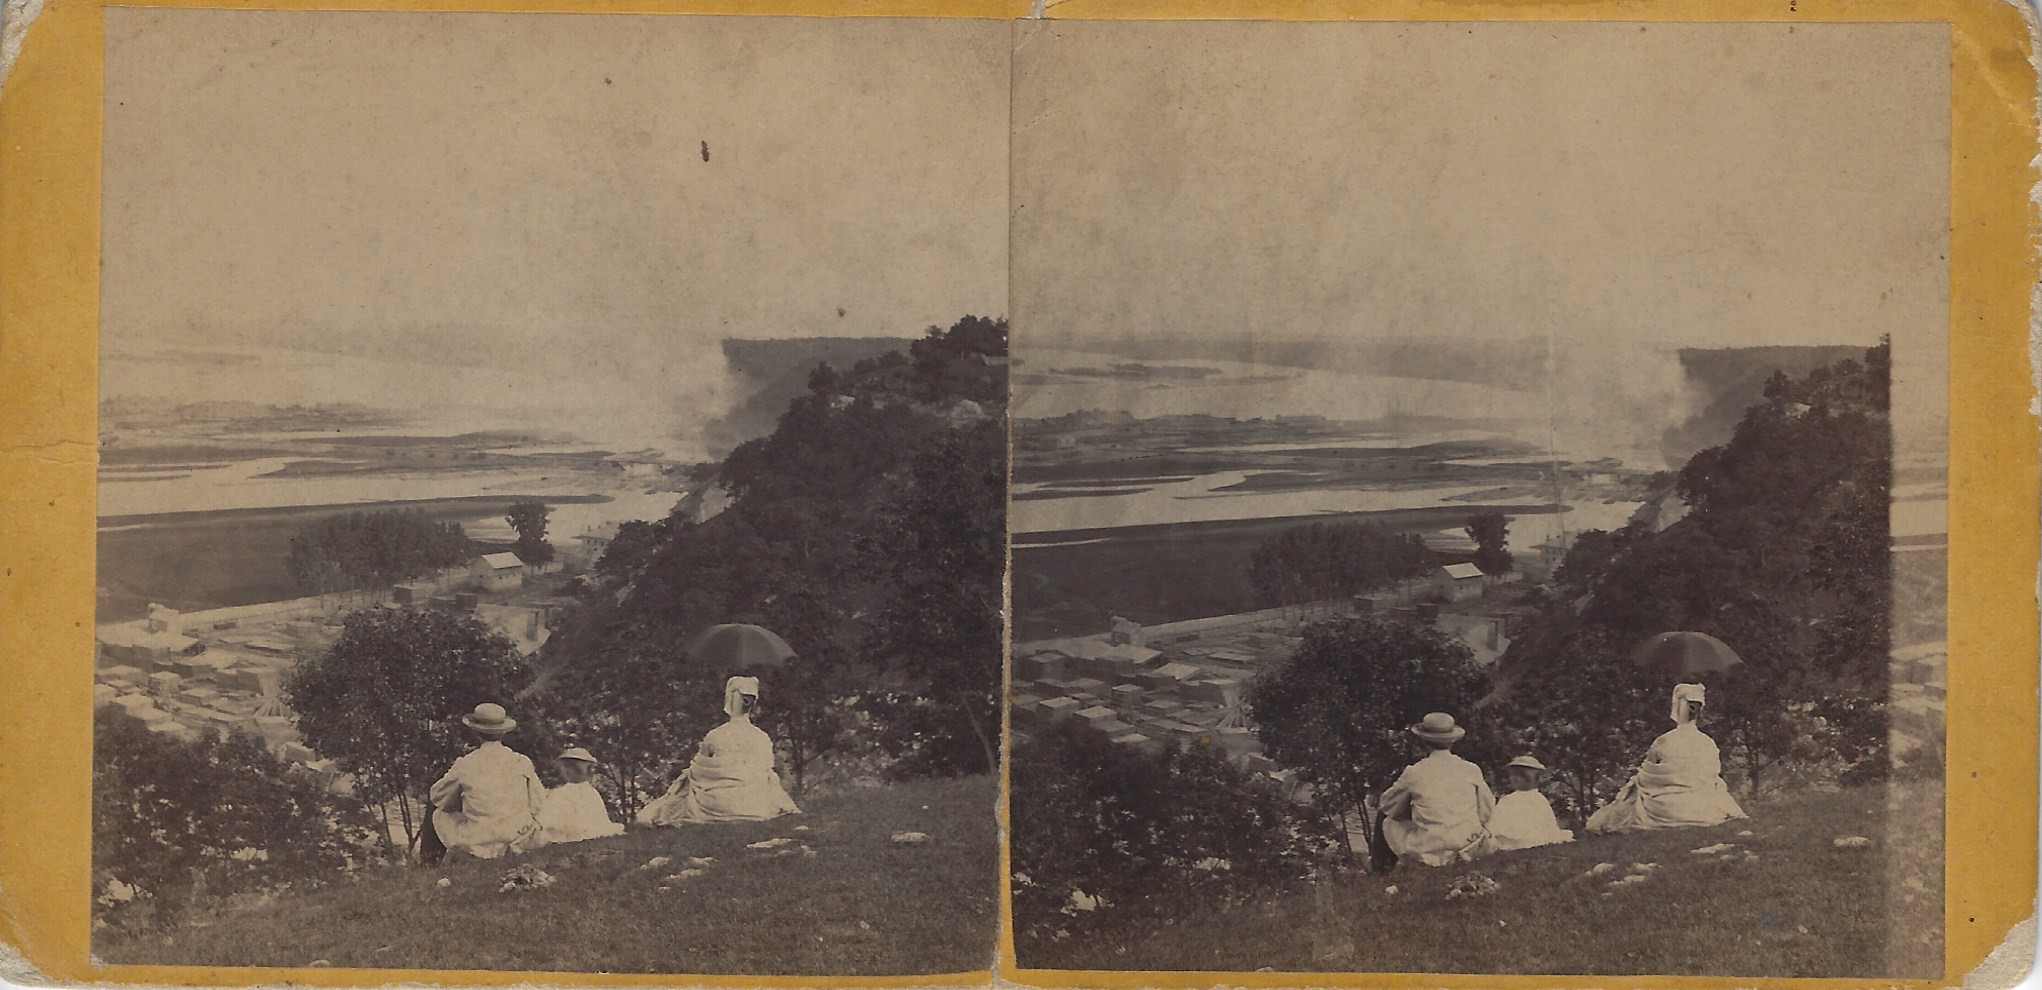 LJTP 100.316 - S. Root - Kelly's Bluff looking Southeast - c1880